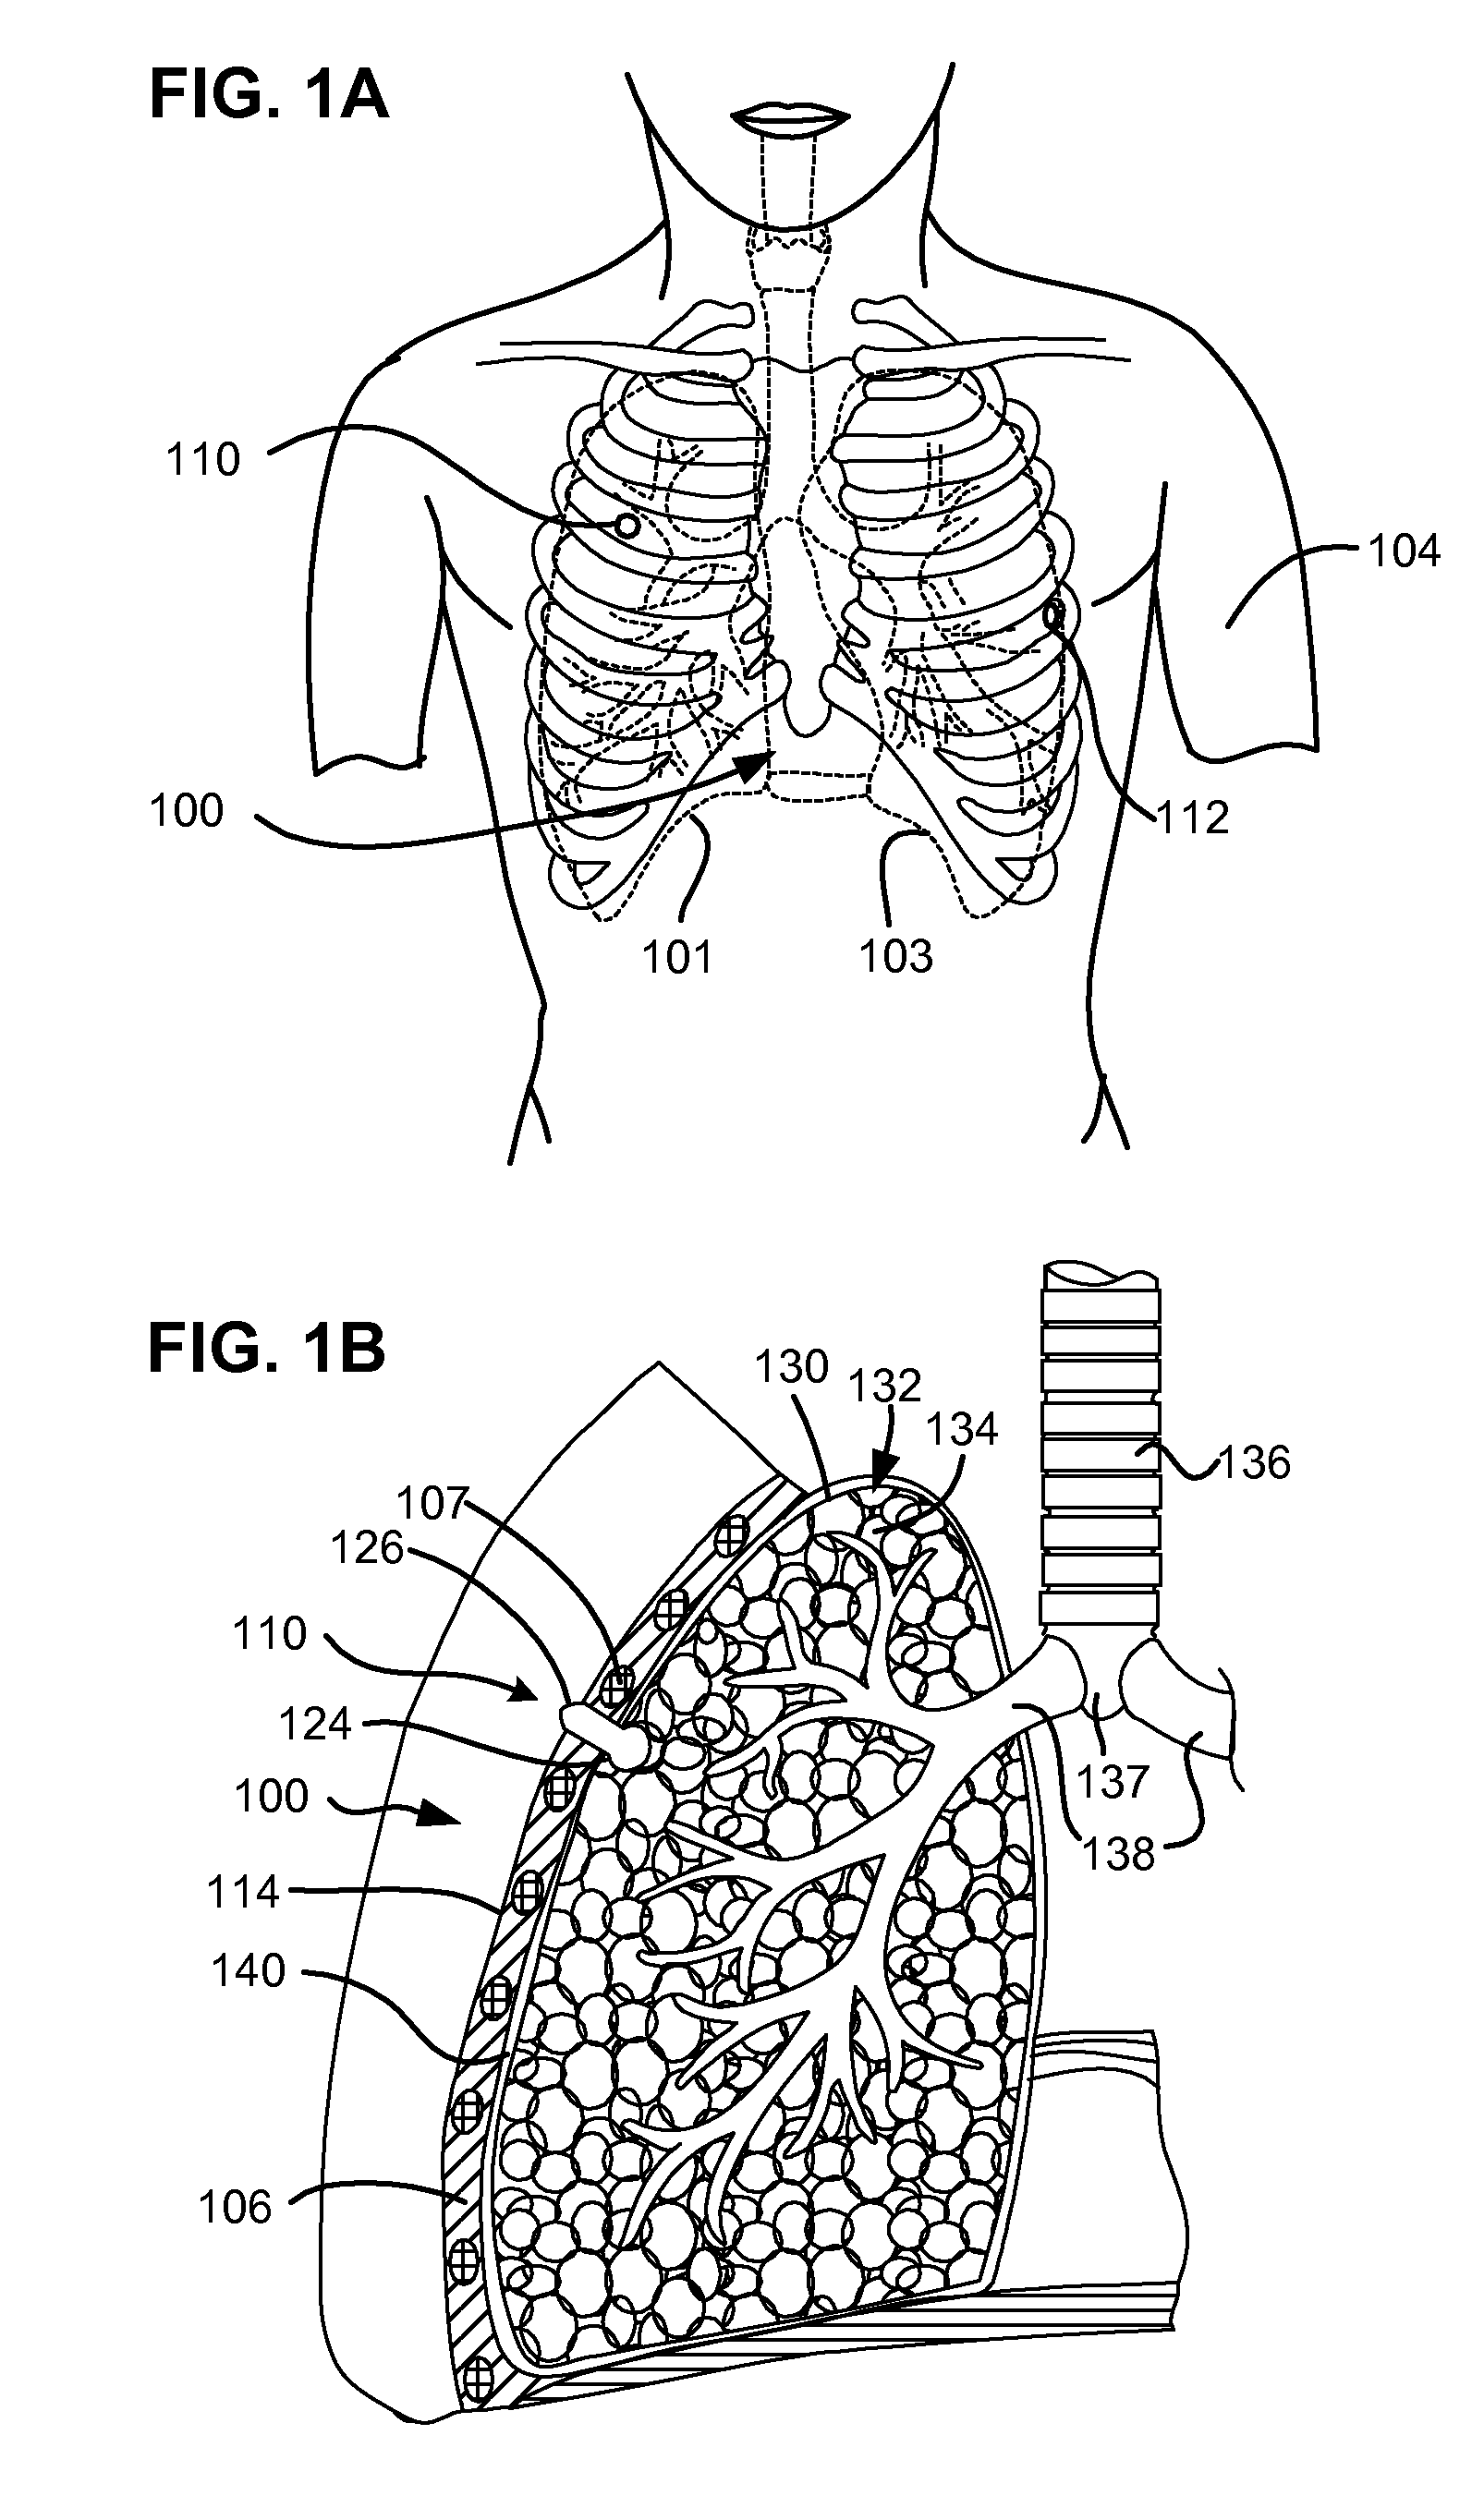 One-piece pneumostoma management system and methods for treatment of chronic obstructive pulmonary disease